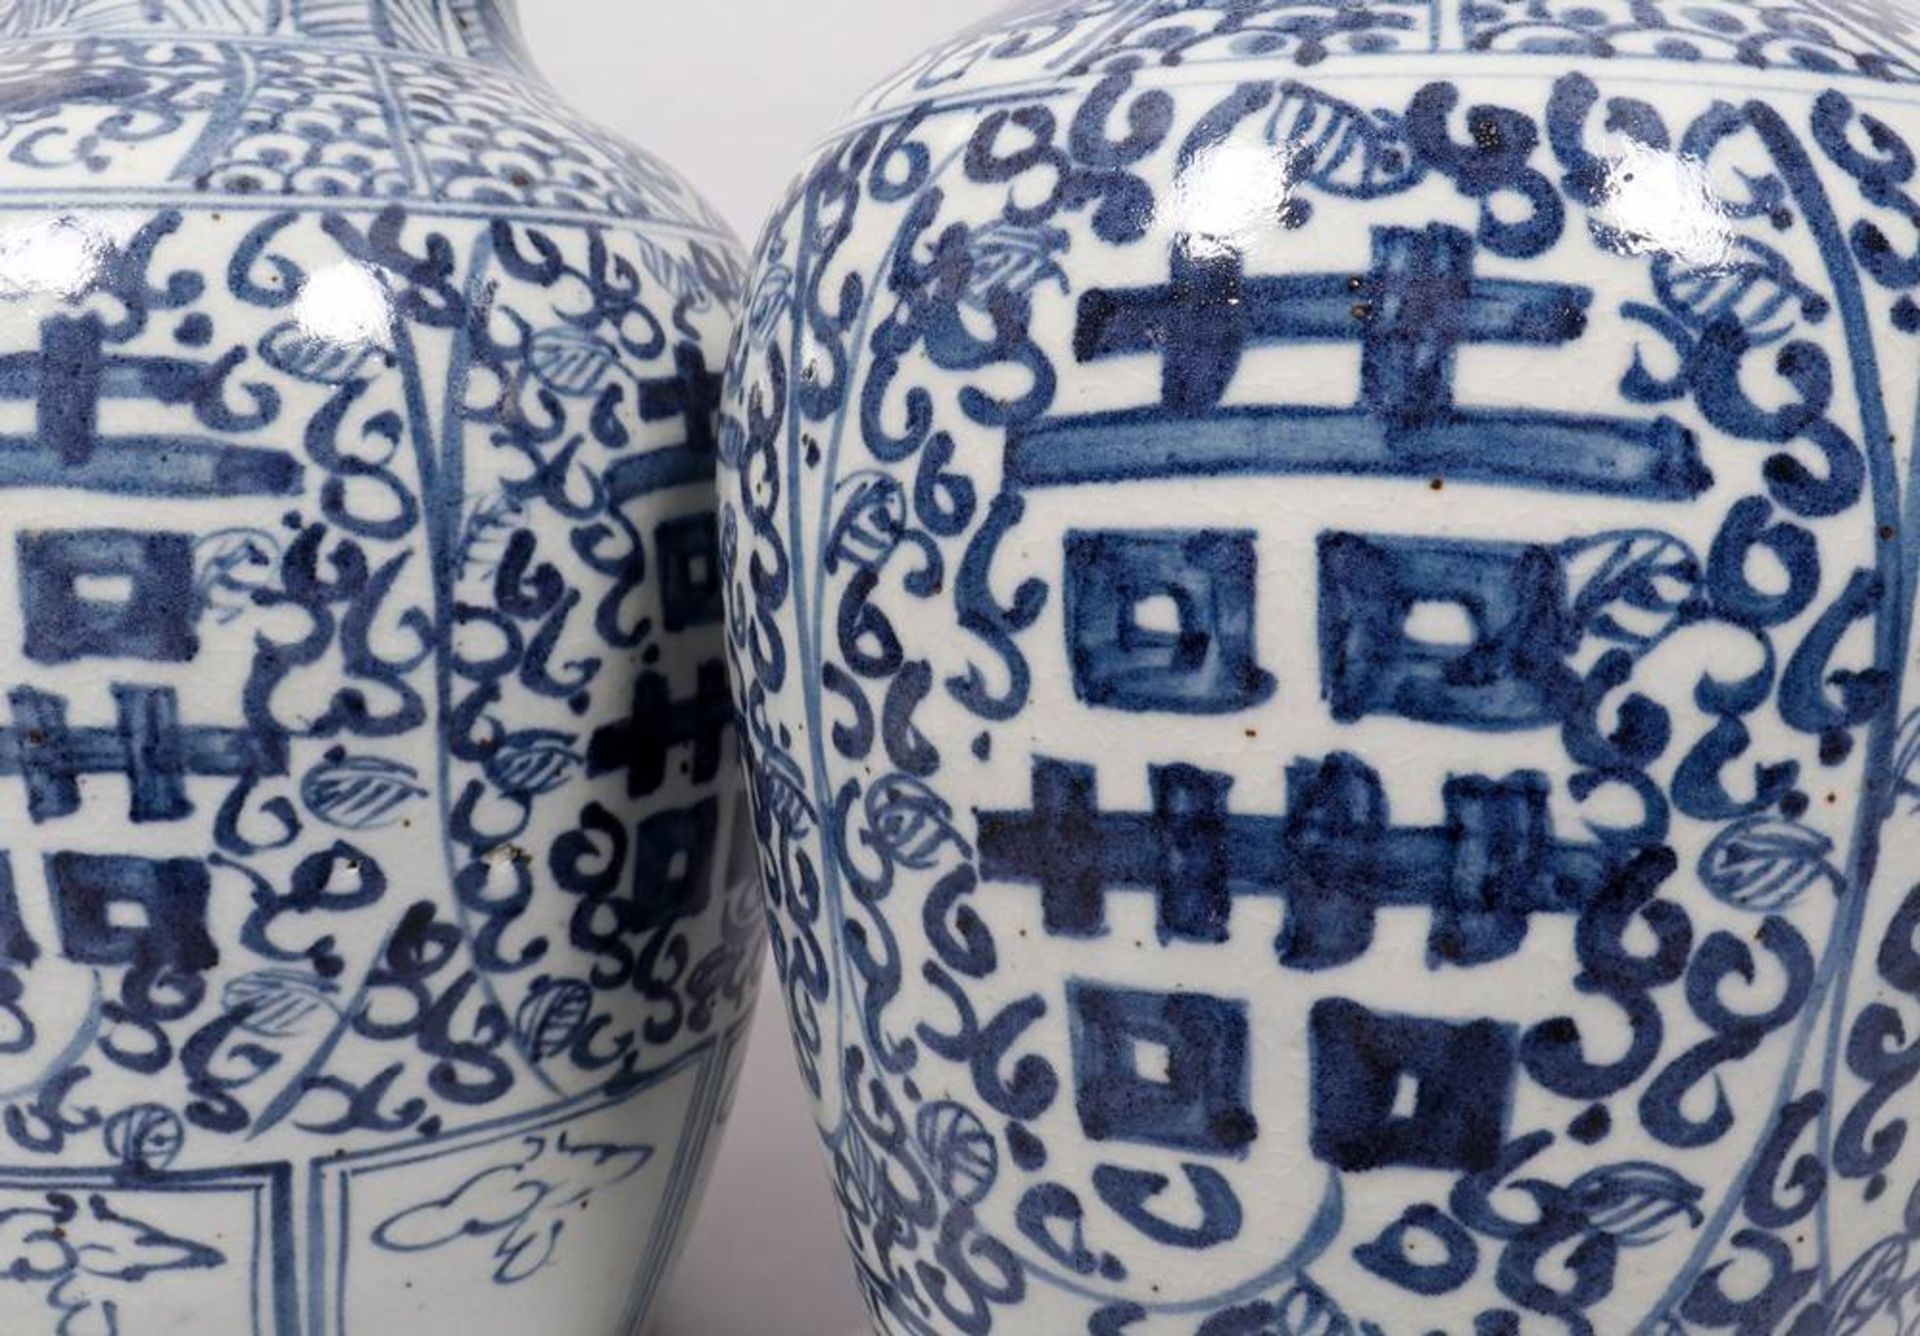 Pair of baluster-vases, China, poss. 18.Jh., porcelain, painted in underglaze blue  - Image 2 of 2